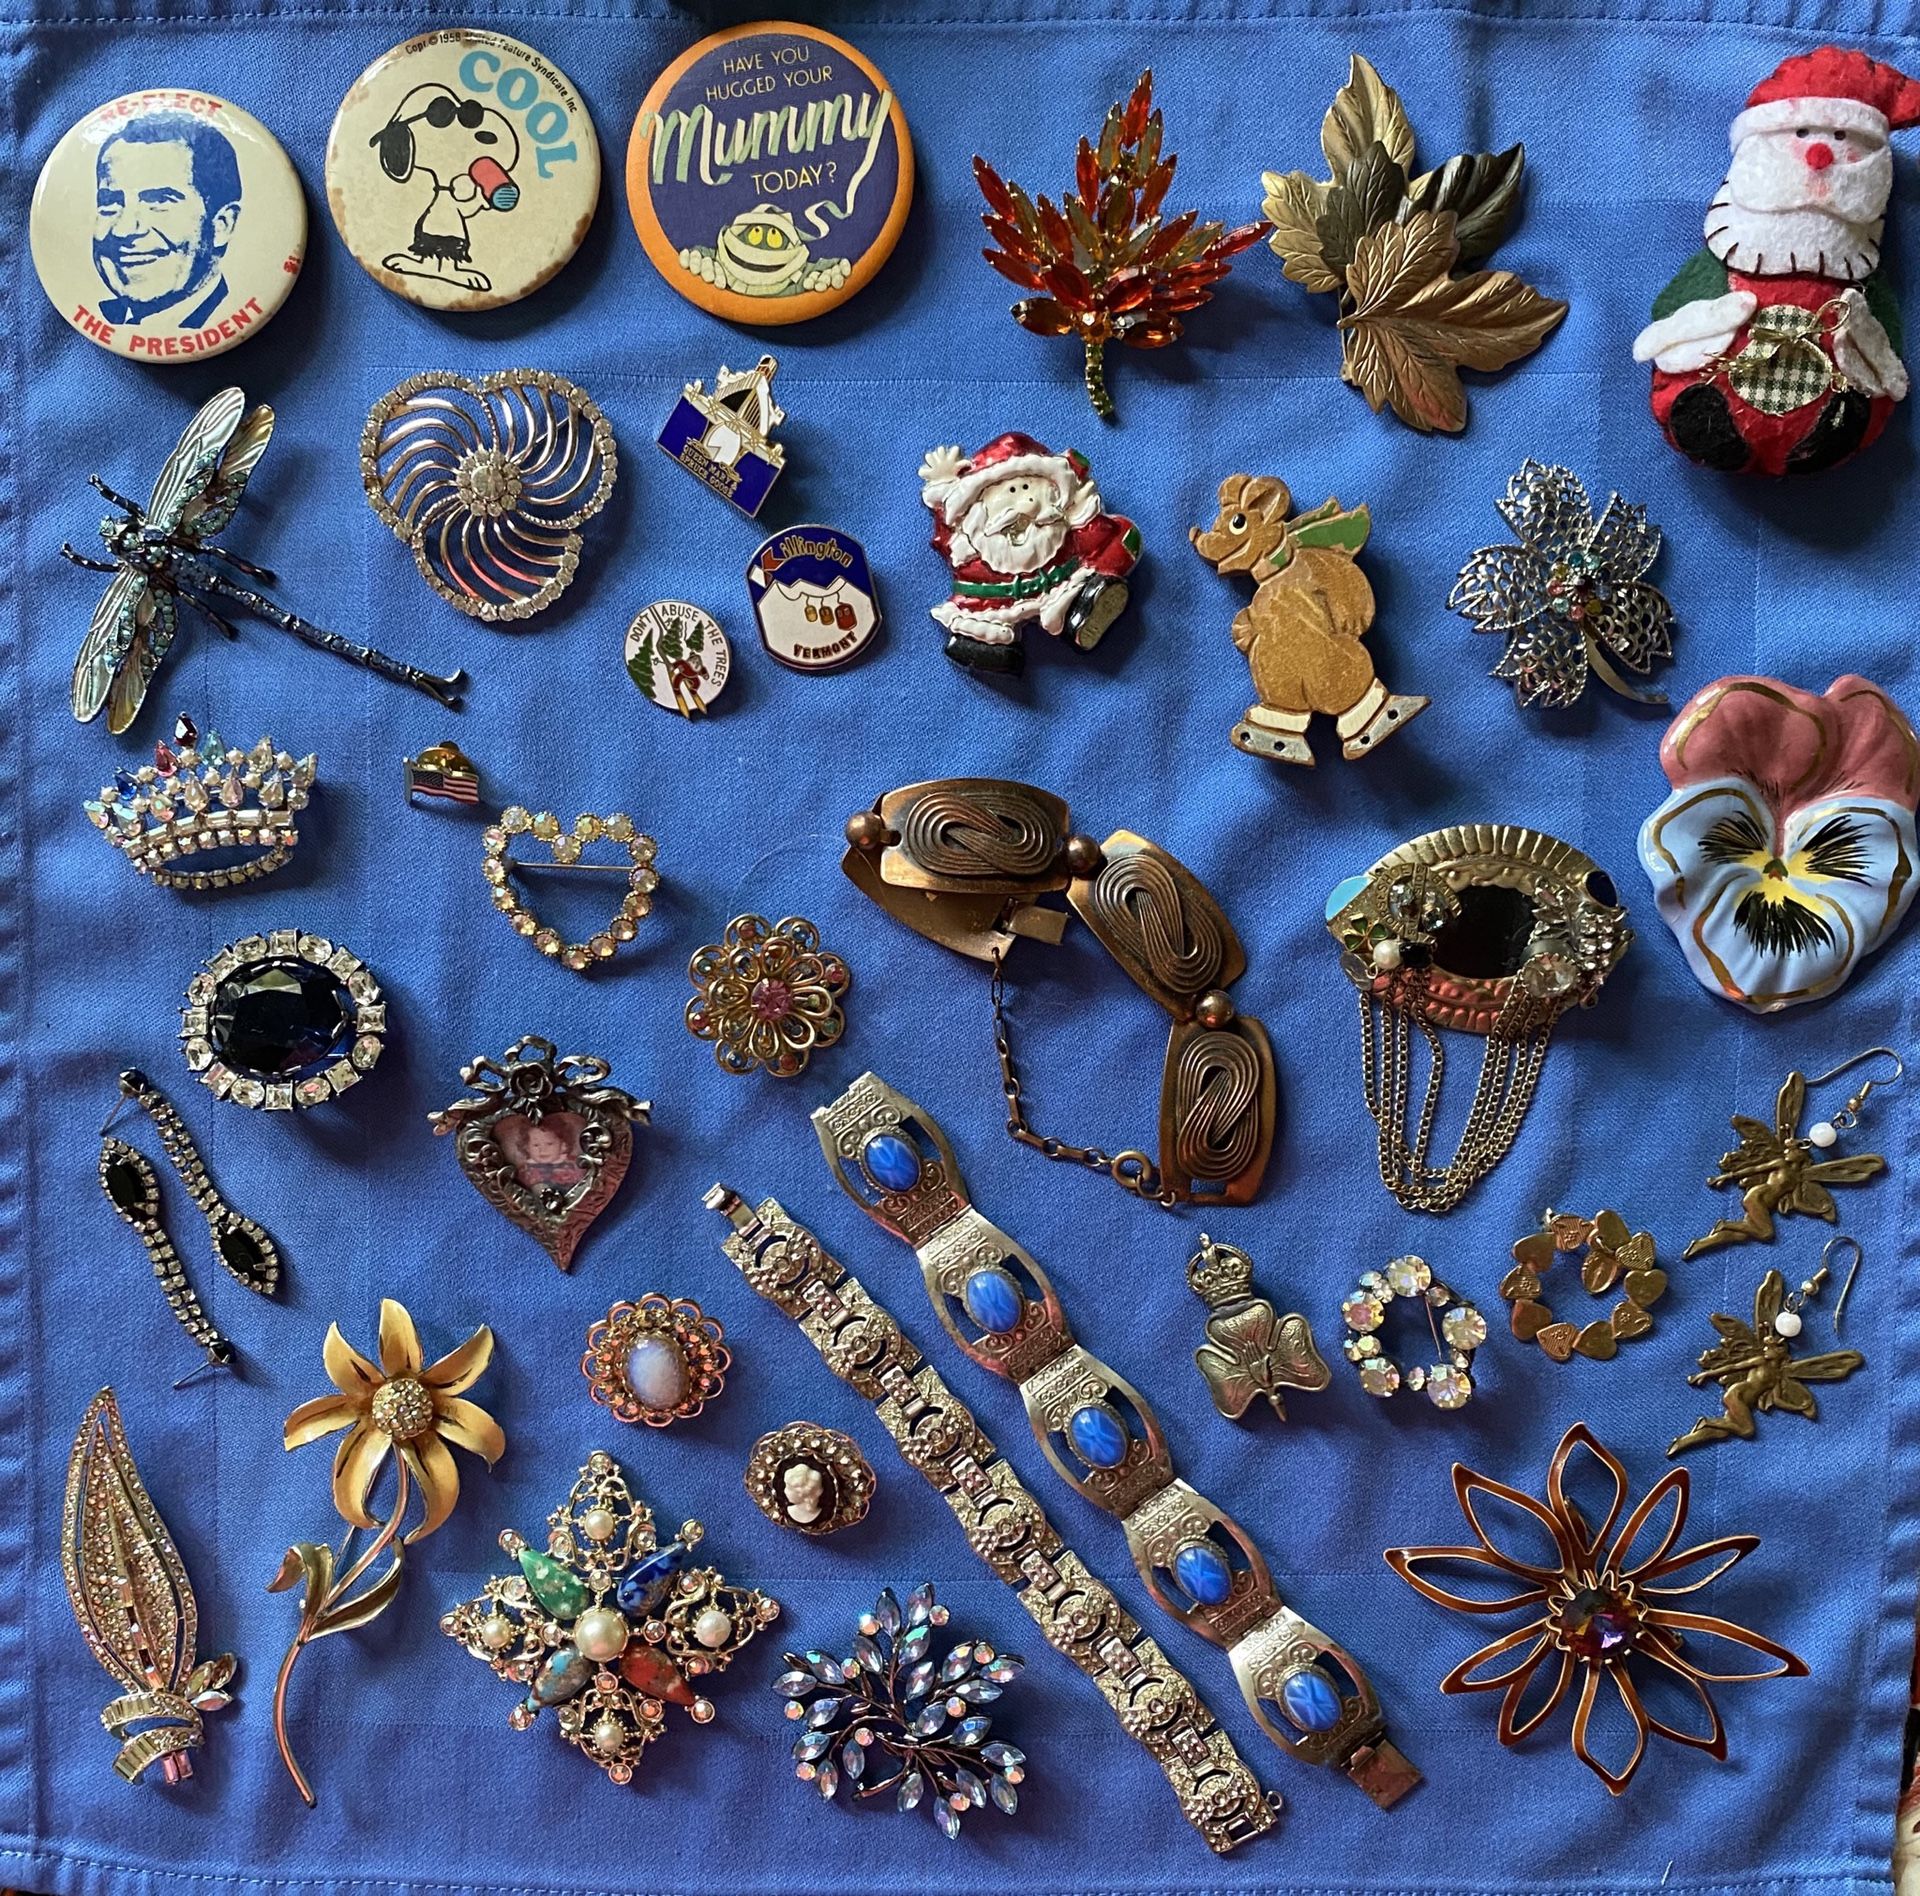 Large Lot of Vintage Jewelry- earrings, brooches/pins, bracelets